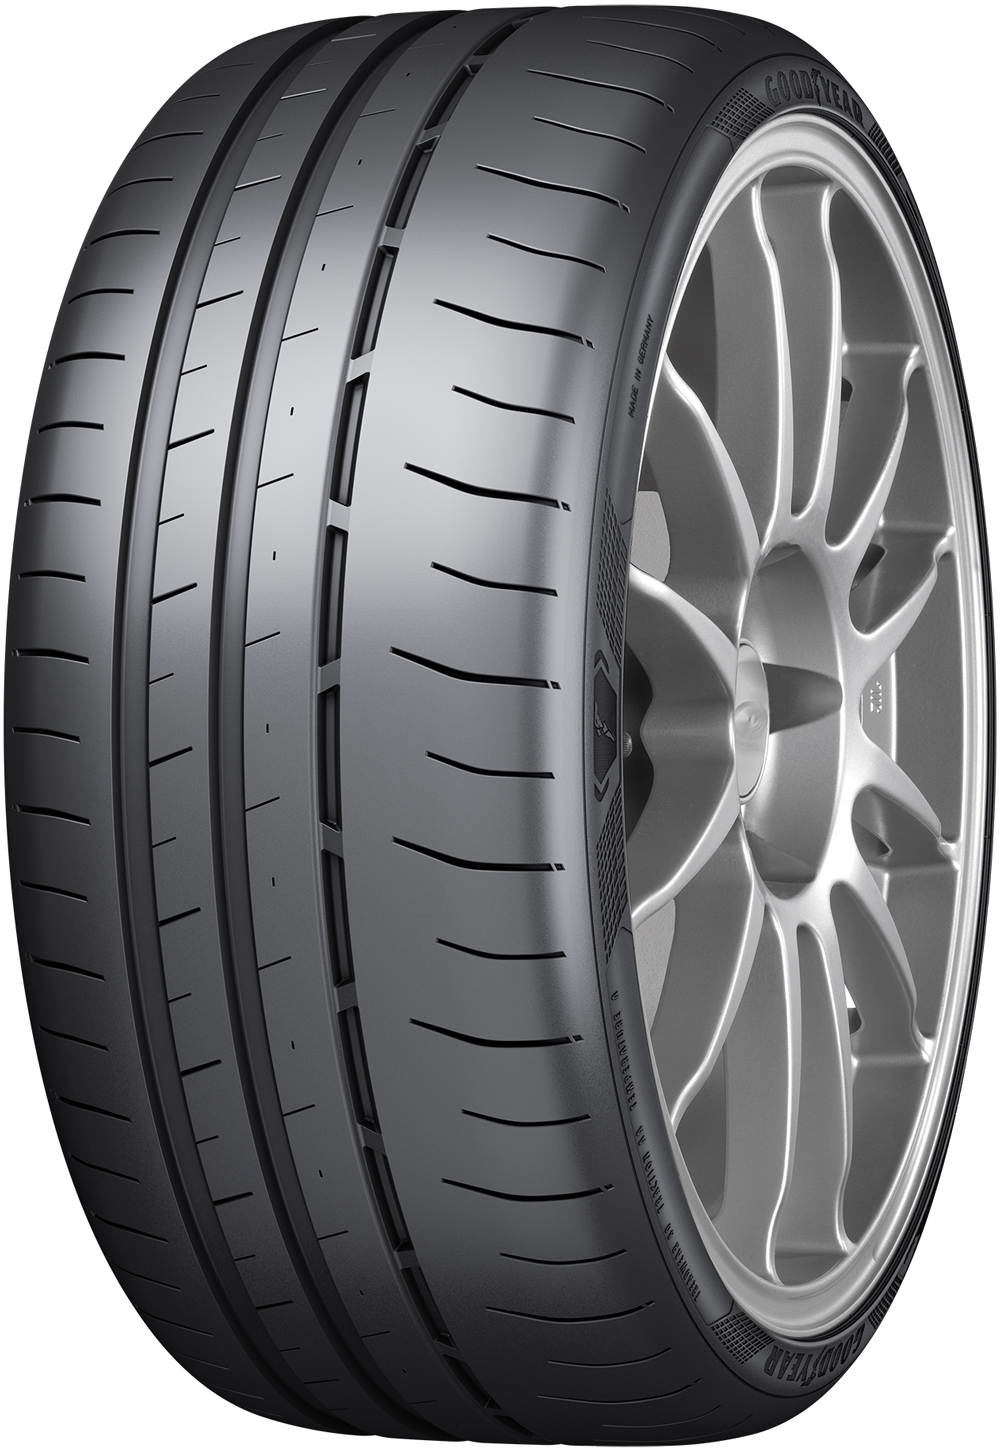 Anvelope auto GOODYEAR EAGLE F1 SUPERSPORT R XL FP 325/30 R21 108